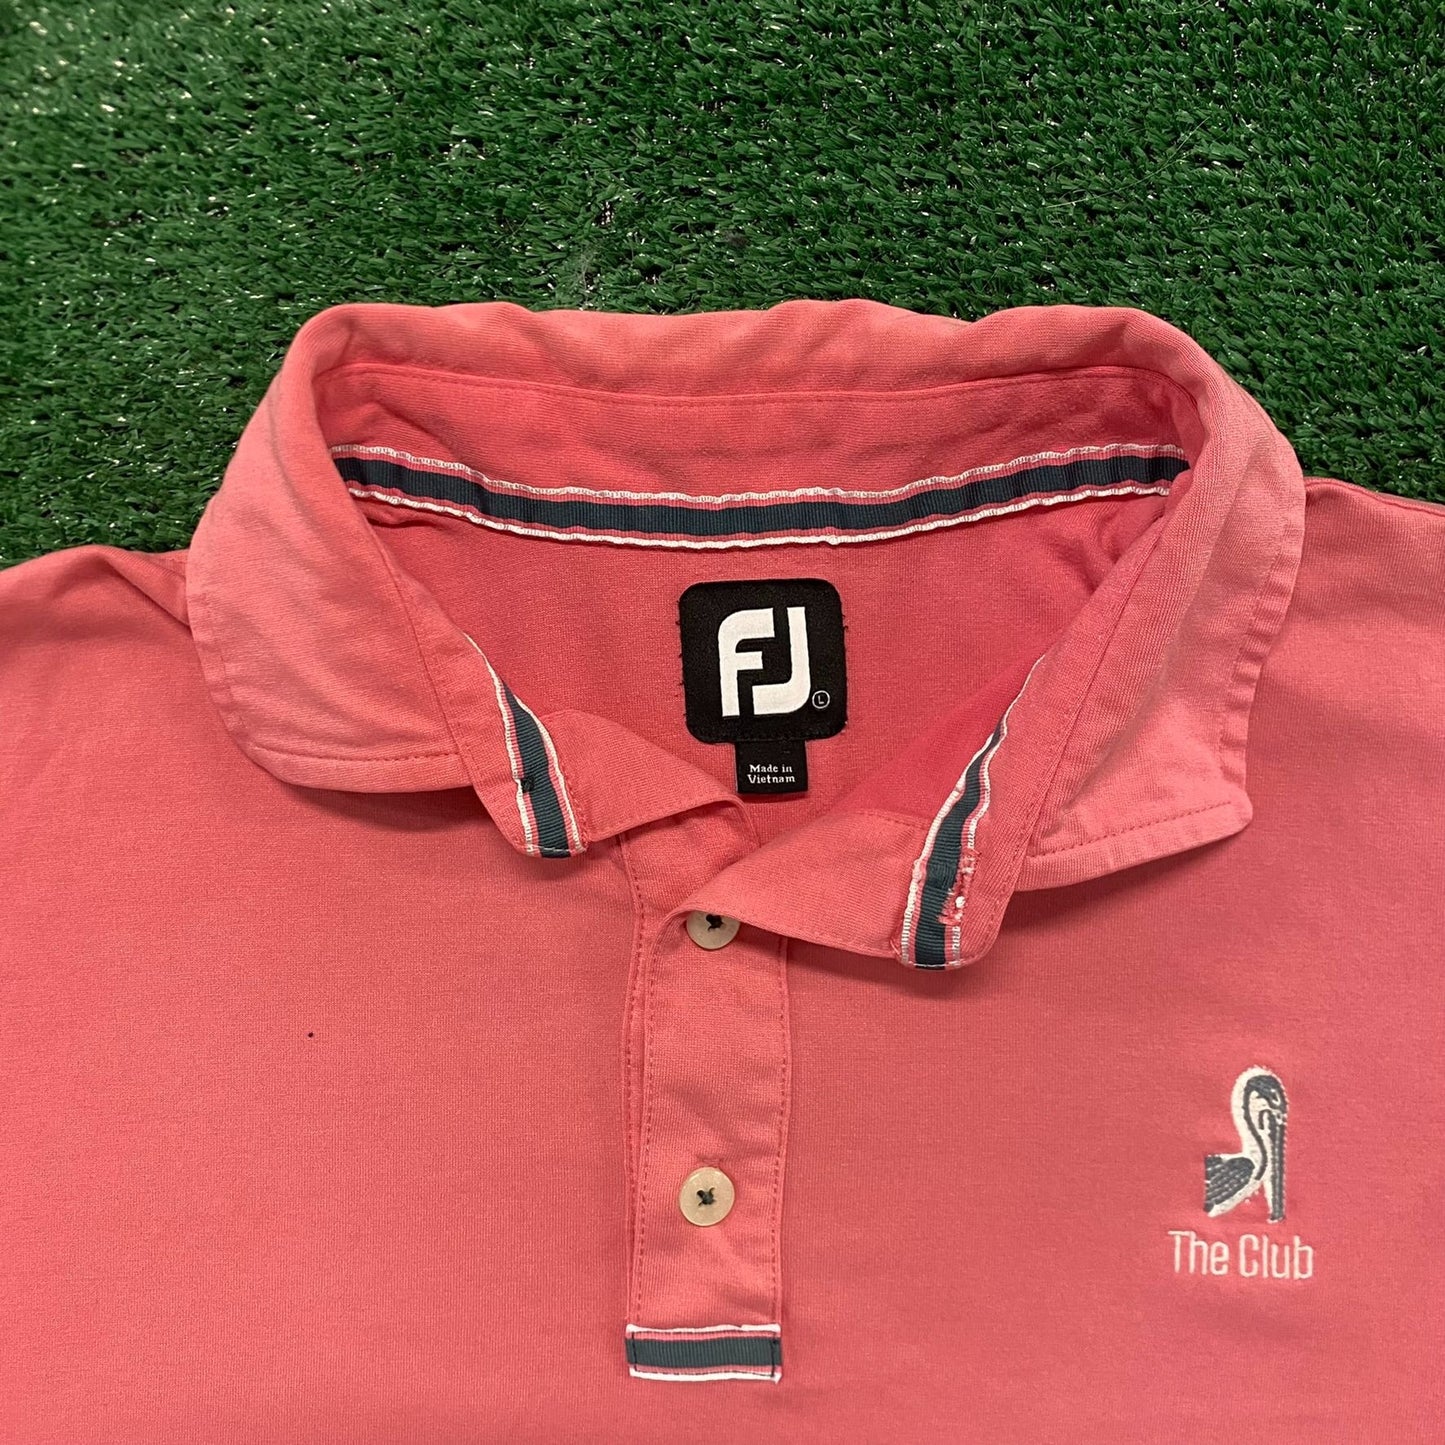 FootJoy Preppy Pink Golf Course Country Club Polo Shirt